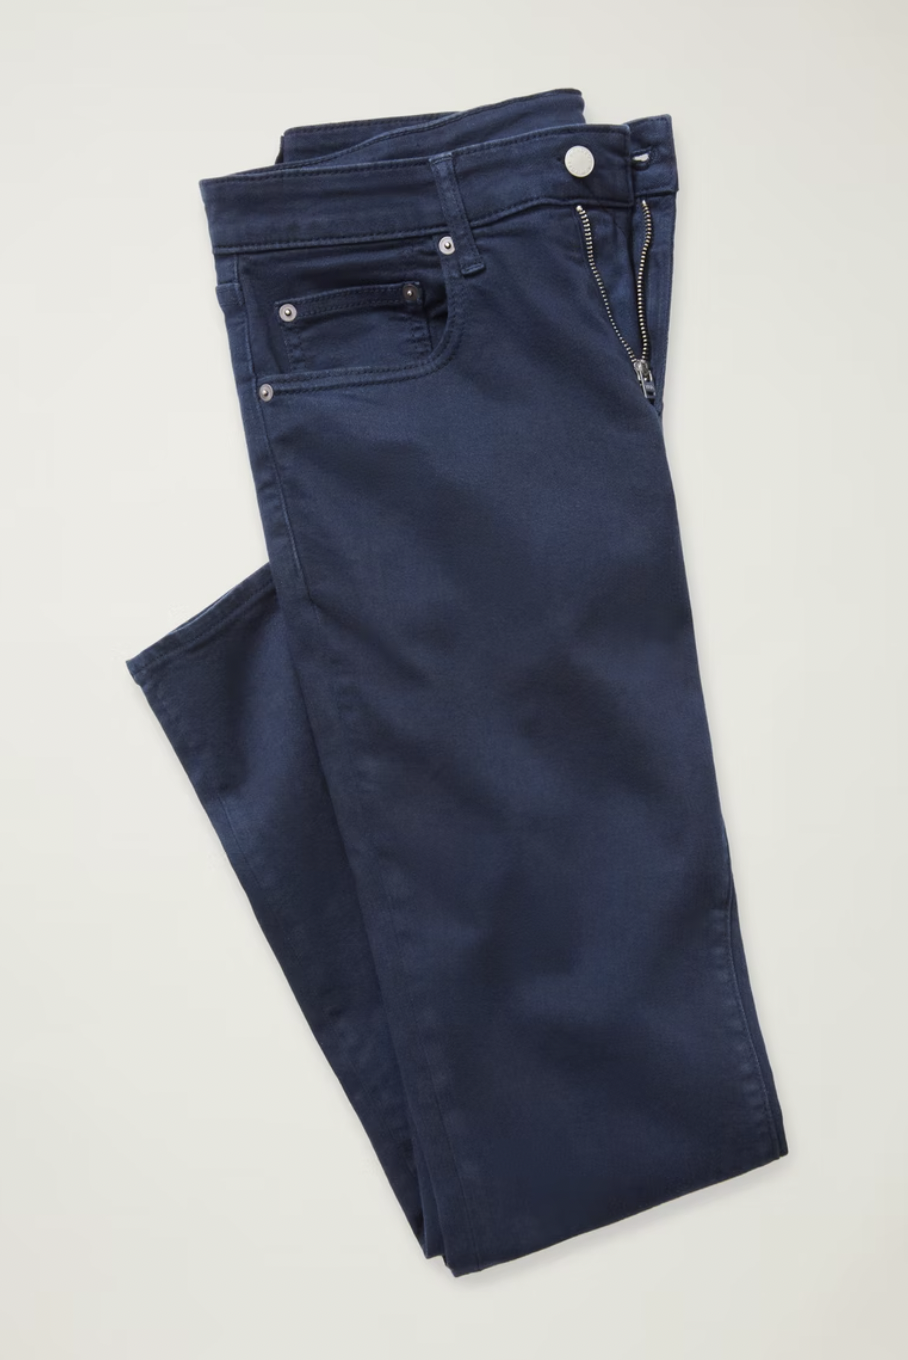 5 Best Work Pants for Construction Workers in 2023  Clever Handymen